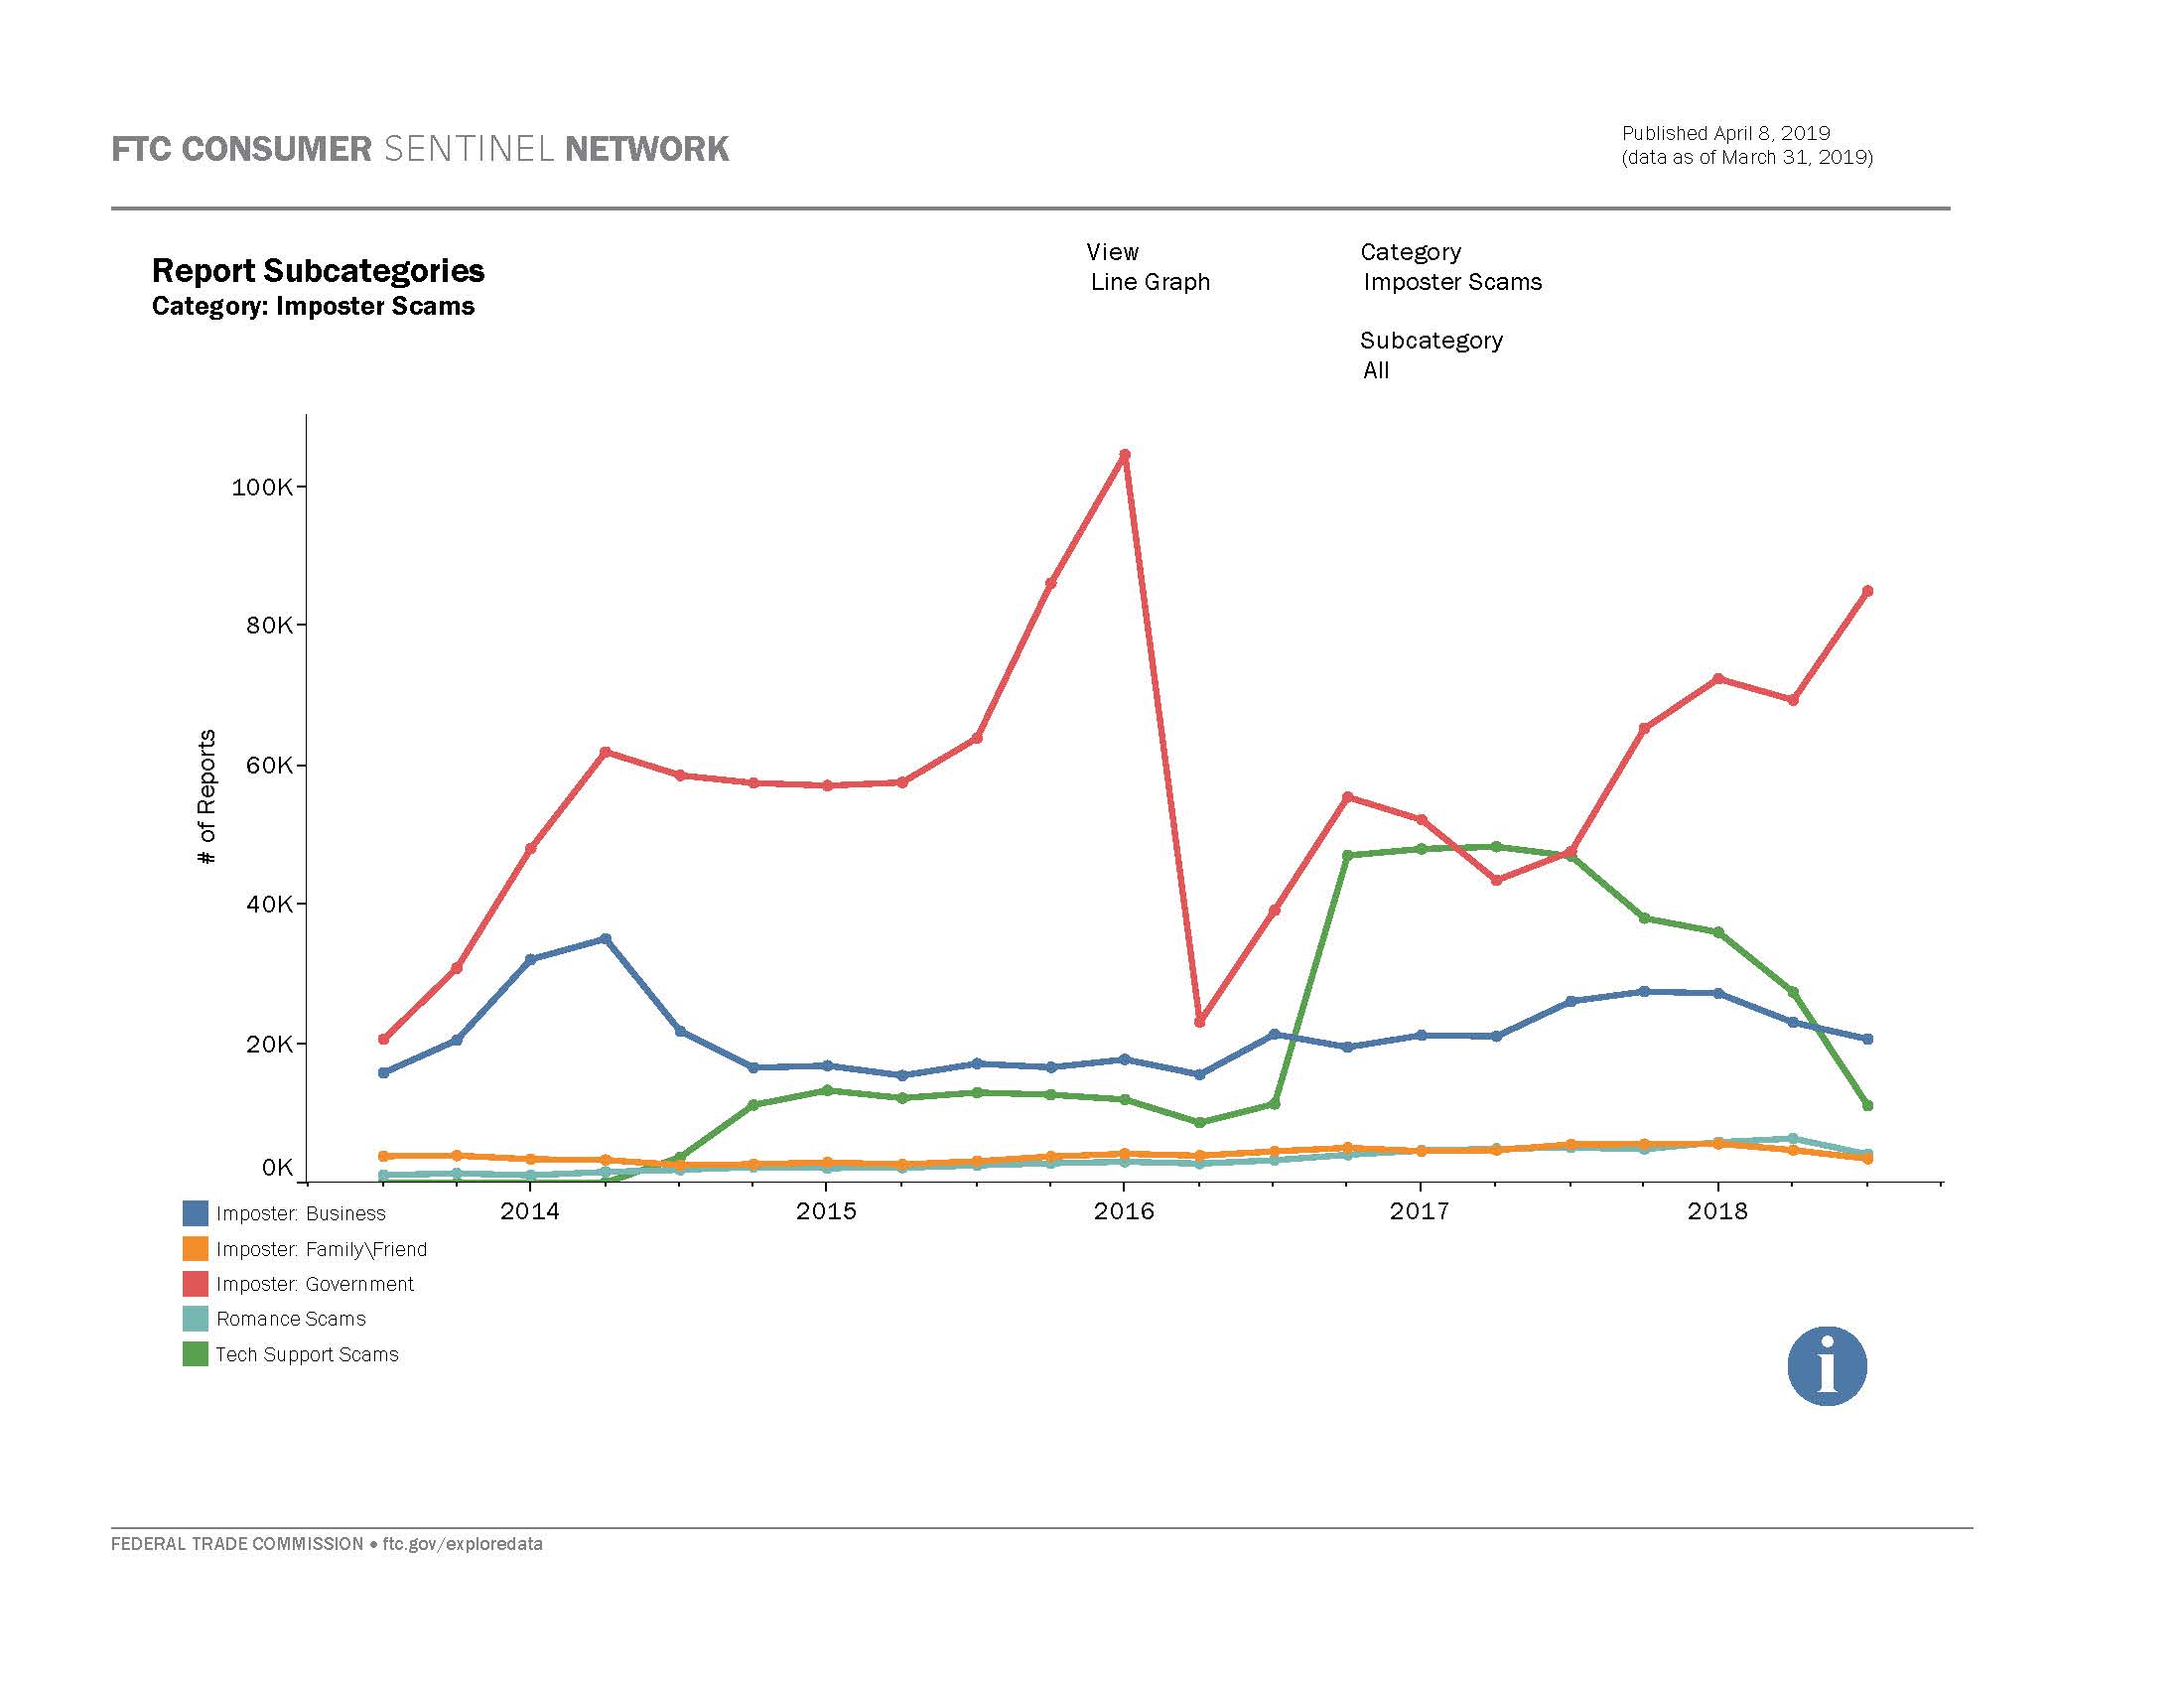 Link to interactive dashboard showing number of fraud reports by fraud subcategory over time.